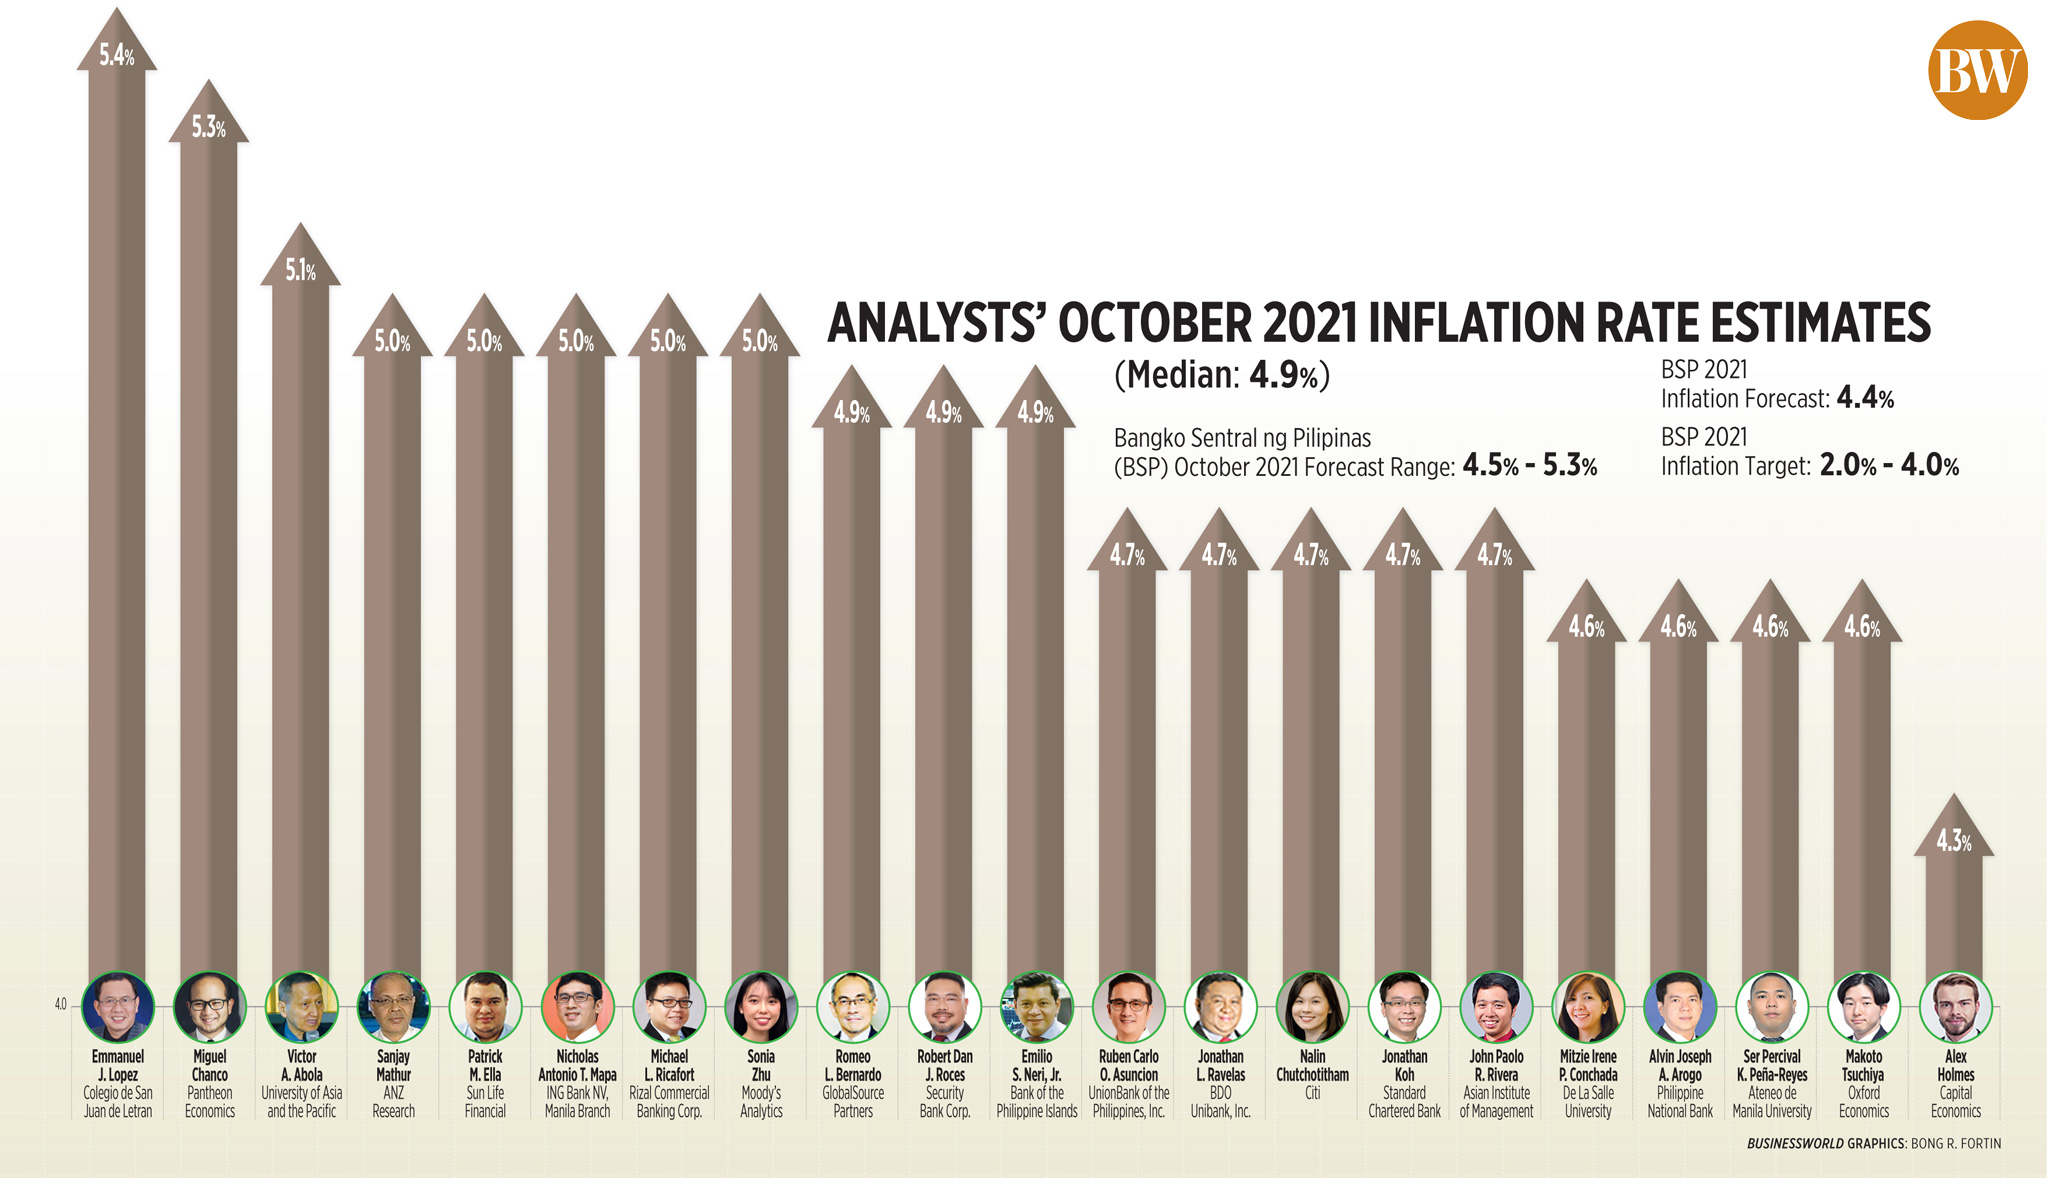 Analysts’ October 2021 inflation rate estimates